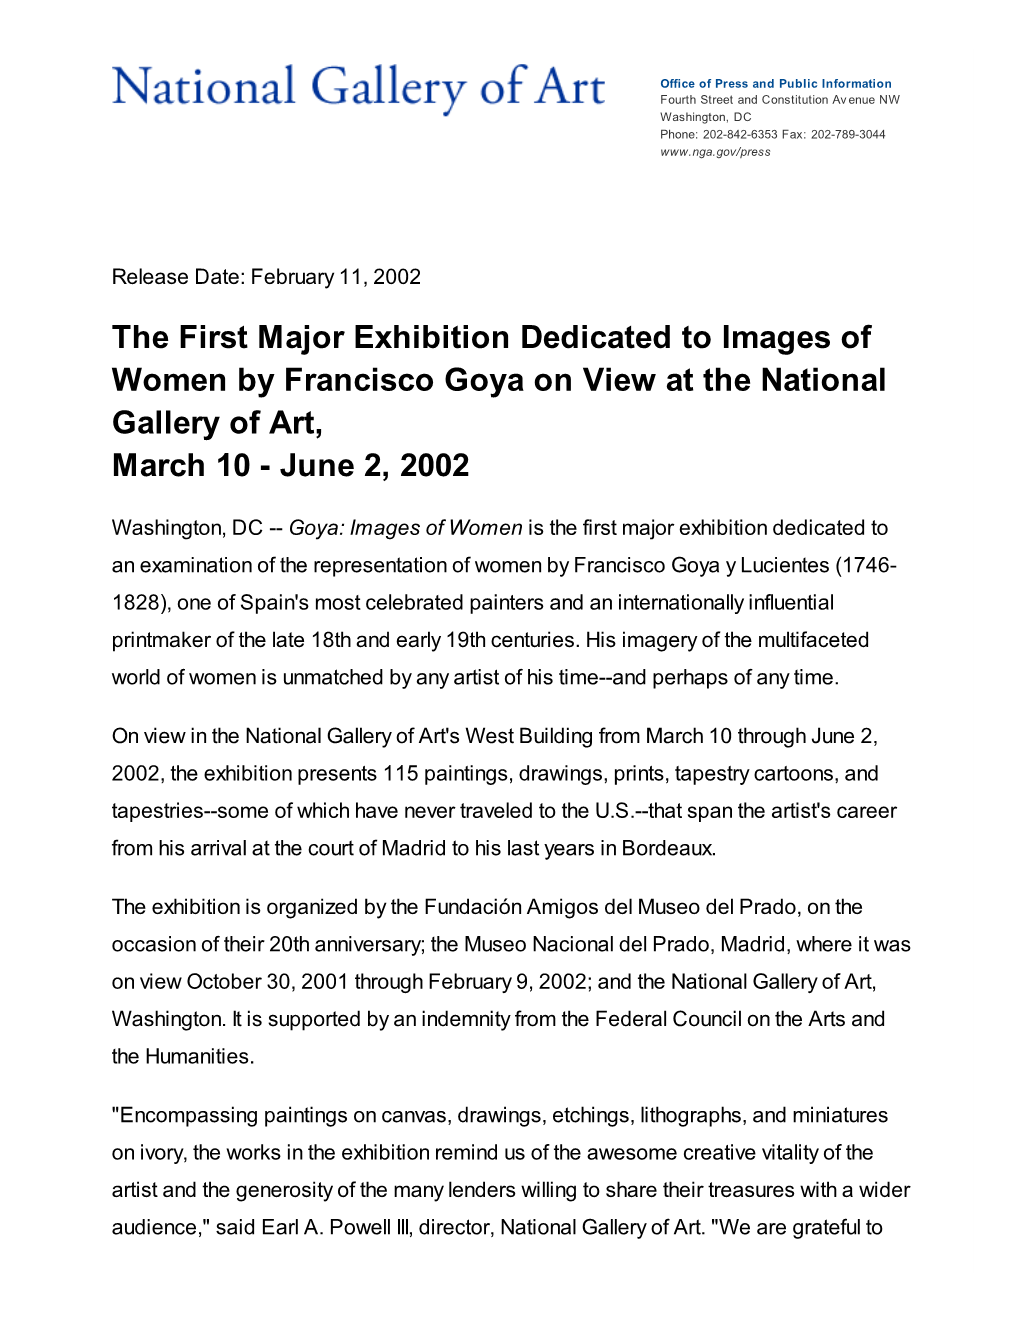 The First Major Exhibition Dedicated to Images of Women by Francisco Goya on View at the National Gallery of Art, March 10 - June 2, 2002